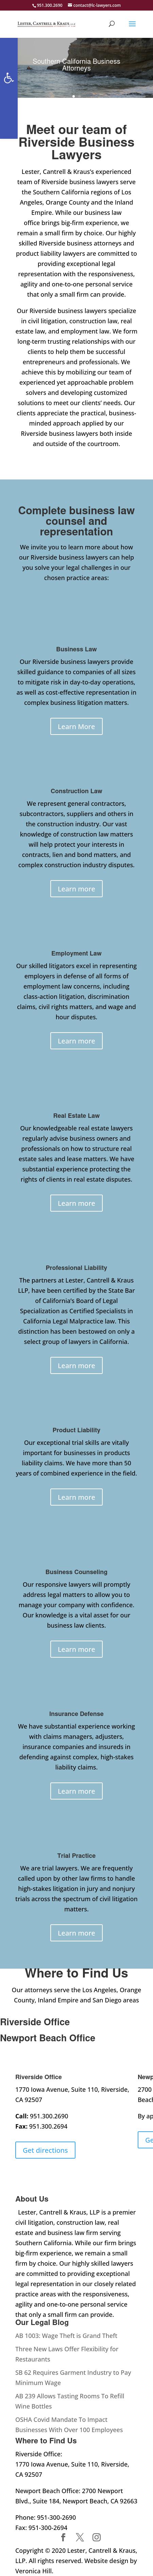 Lester & Cantrell, LLP - Riverside CA Lawyers